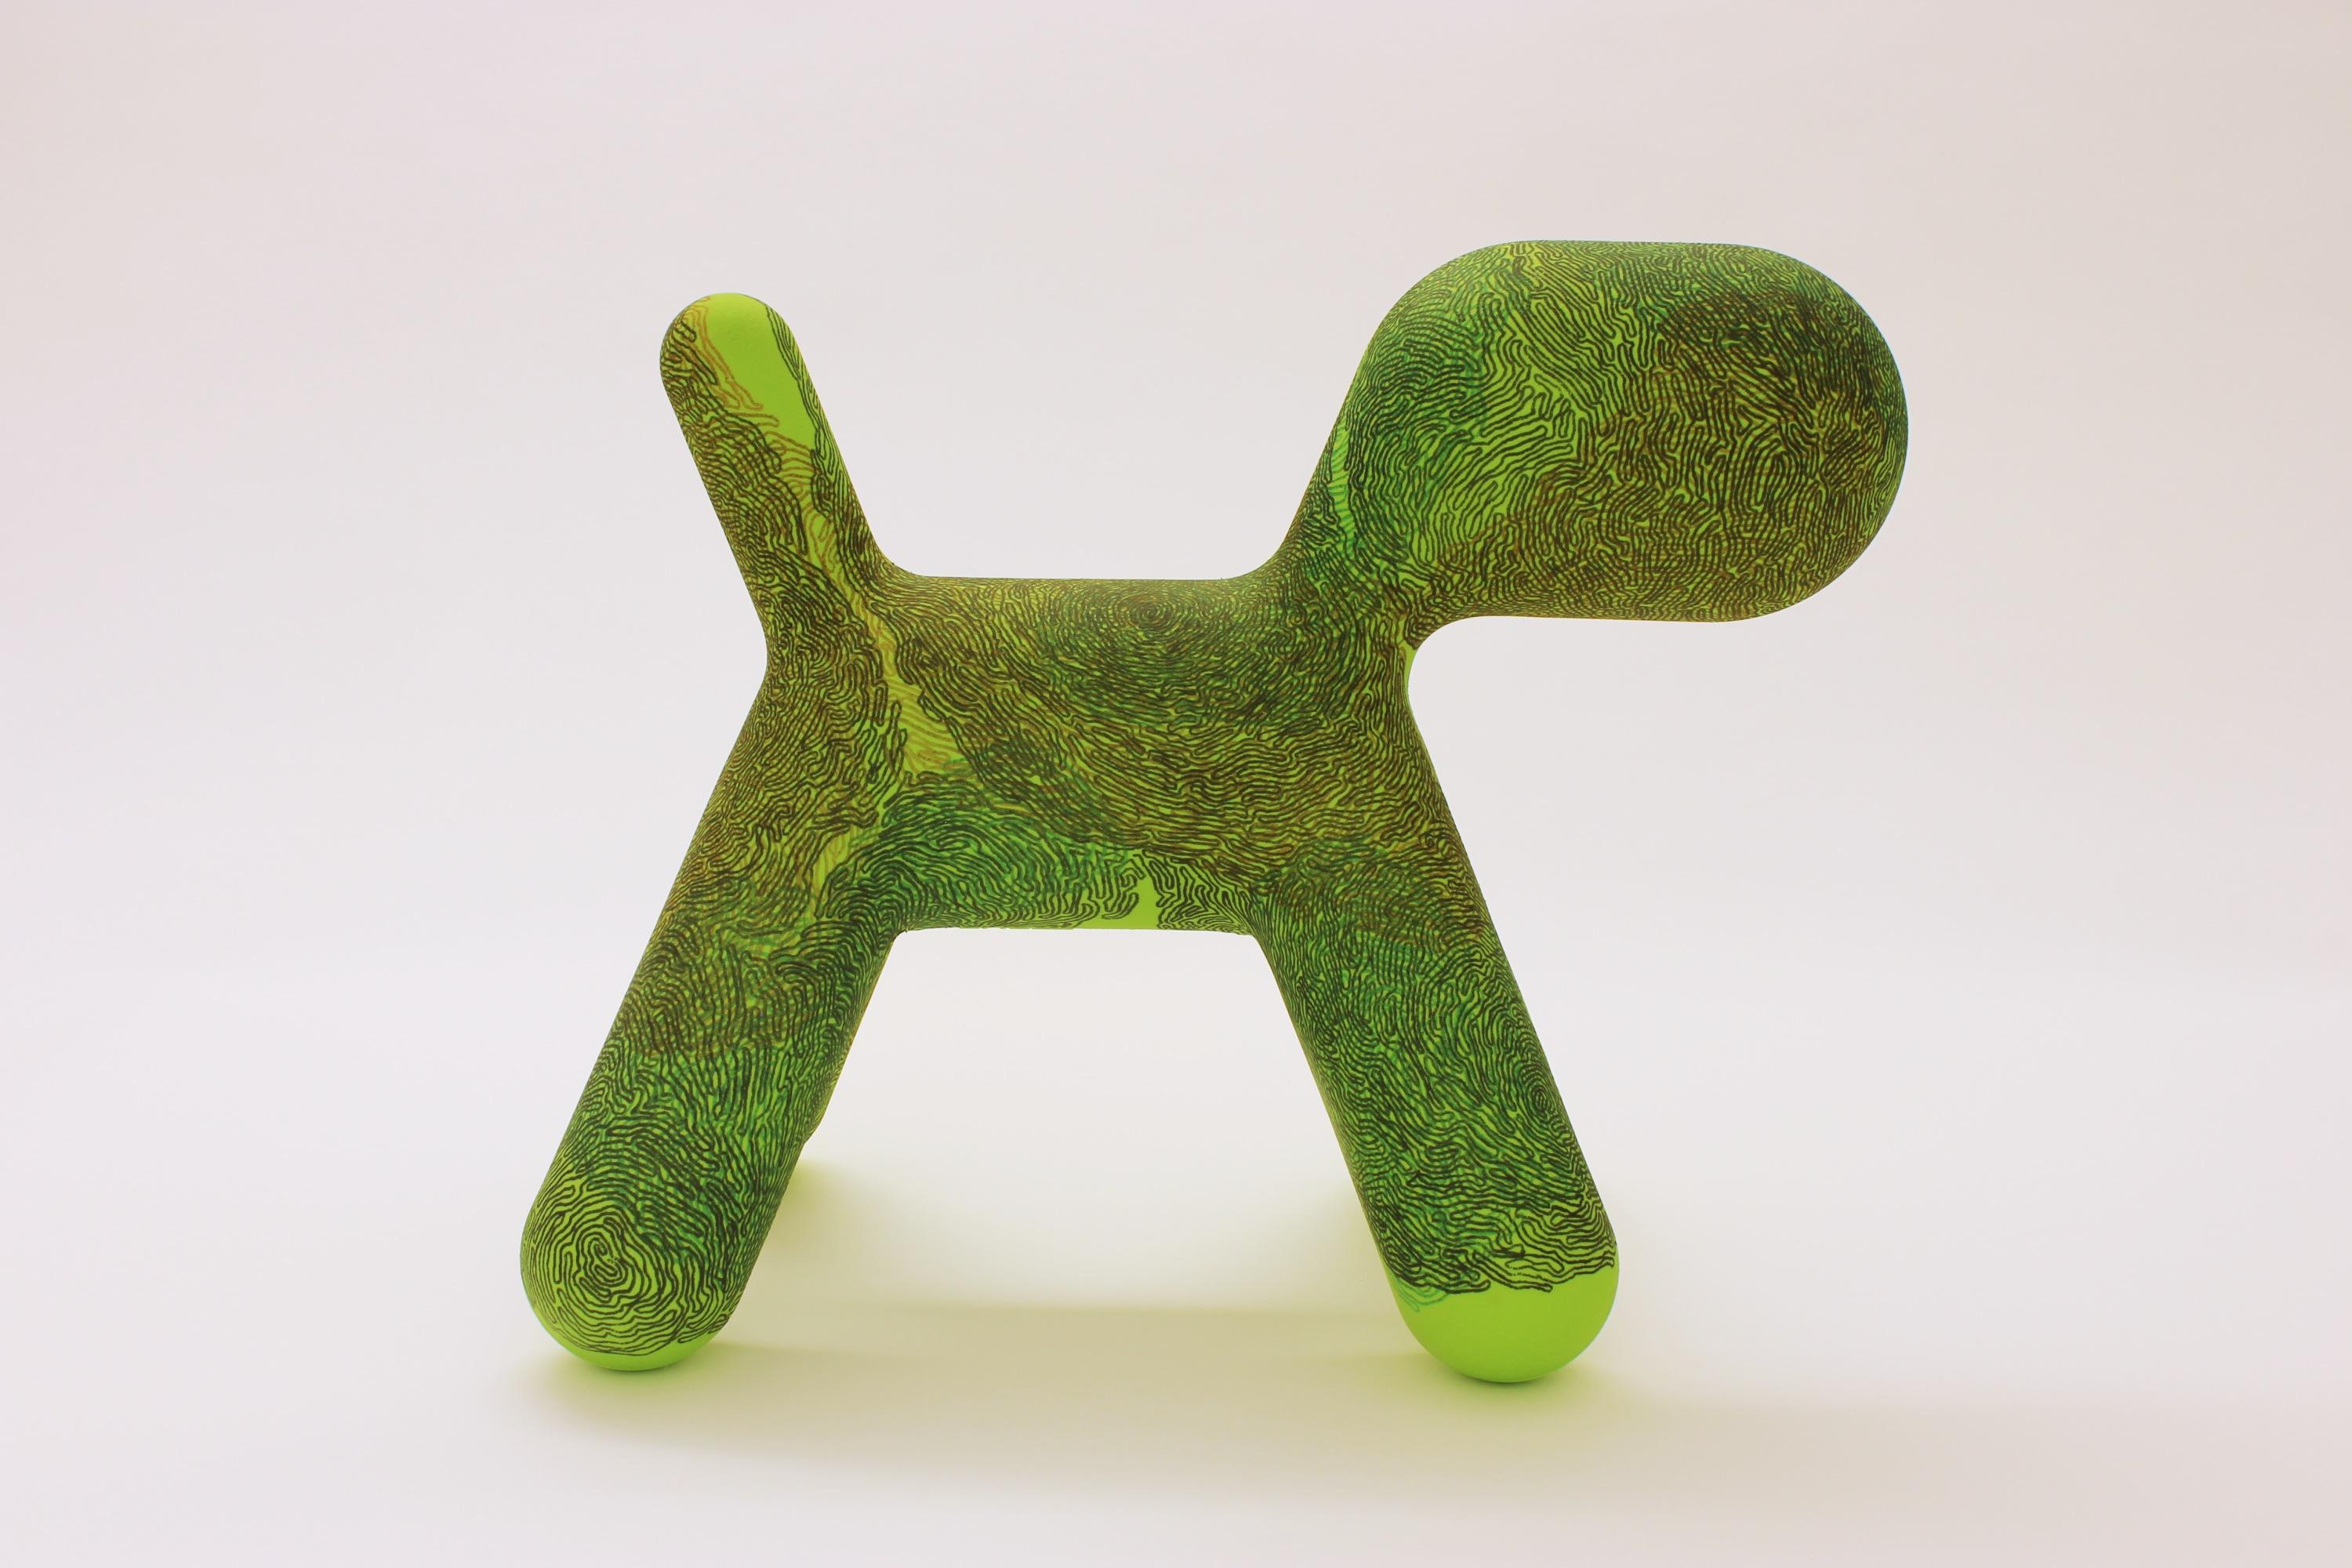 Puppy is a piece designed by Eero Aarnio for the Italian brand Magis. The contemporary art and design gallery Art321 invited different artists and designers to participate in a Puppy, the pieces were exhibited in the gallery and on the occasion of